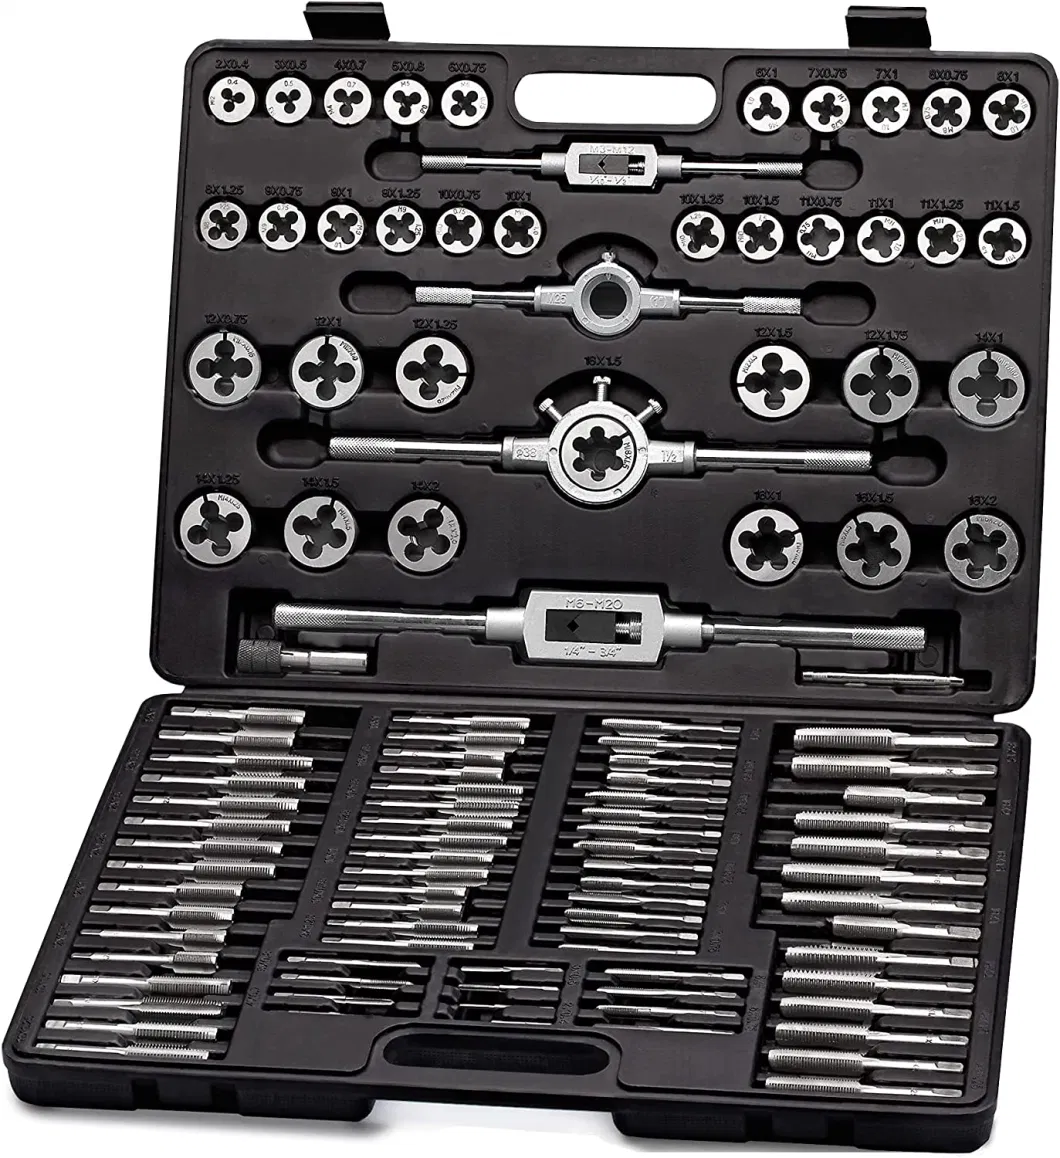 110PCS Tap and Die Set Metric and Imperial Thread Tap Die Wrench Kit Hand Tapping Tools Screw Tap Drill Set